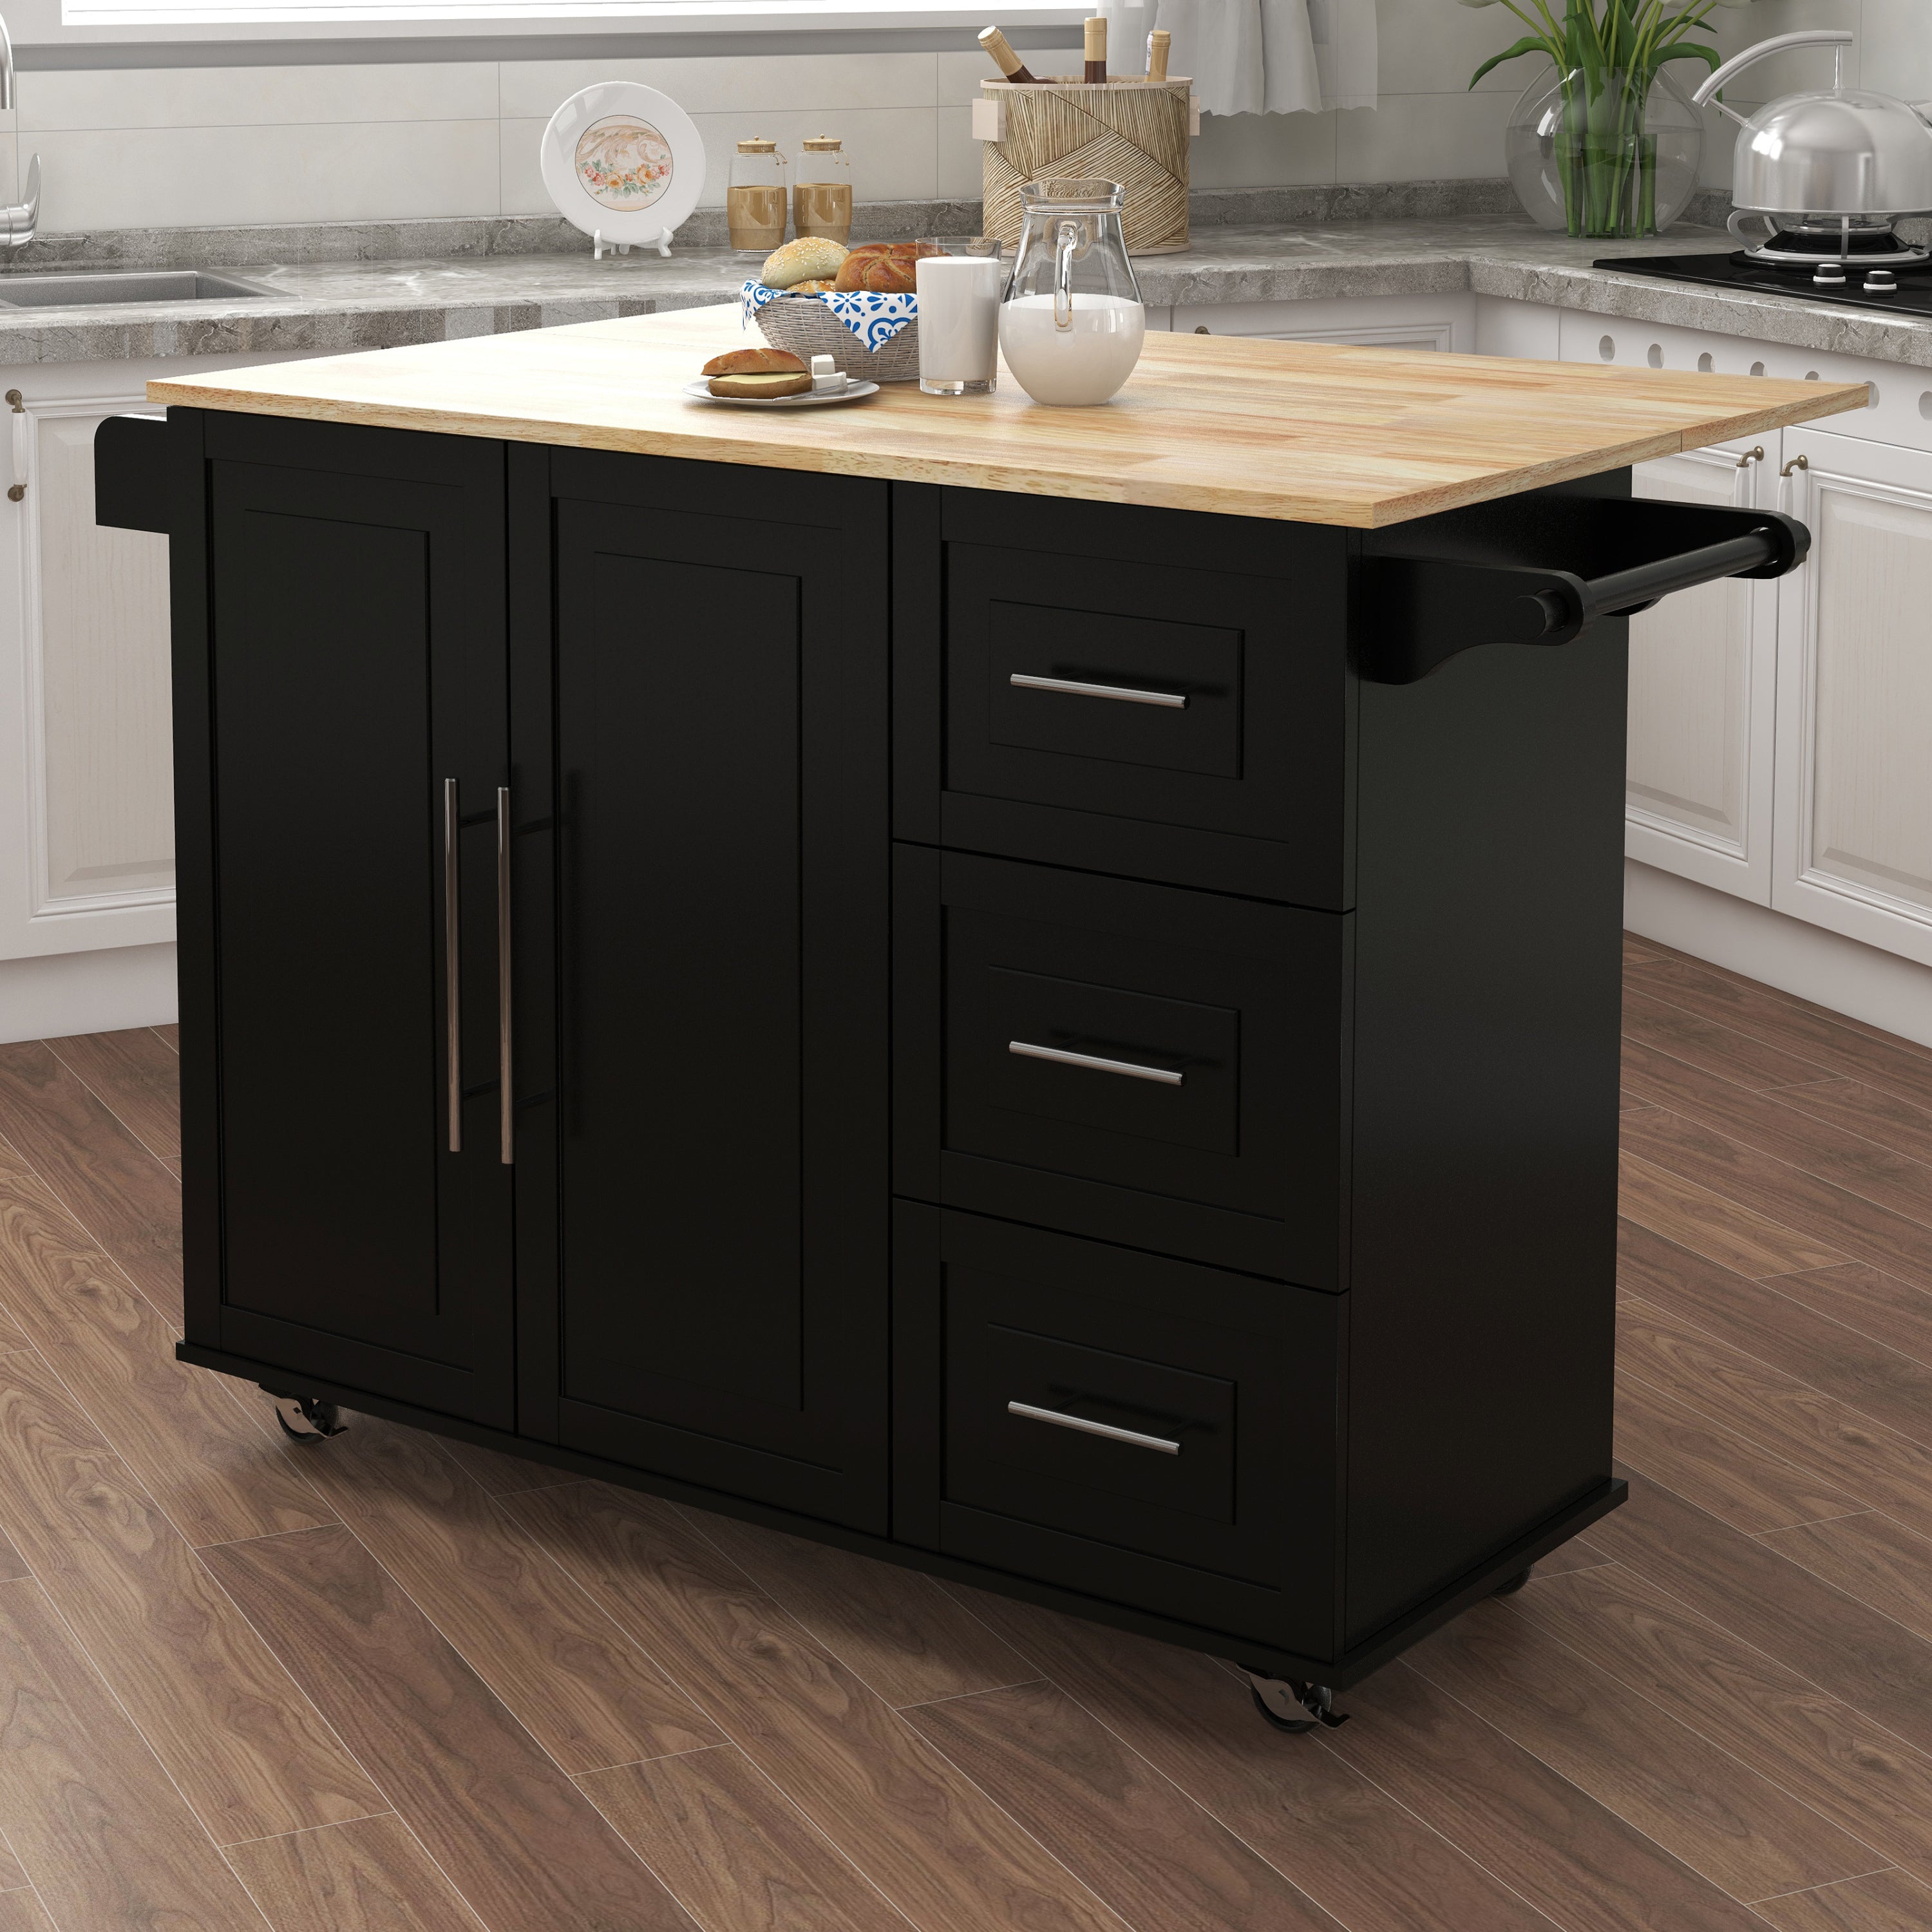 Kitchen Island with Spice Rack, Towel Rack and Extensible Solid Wood Table Top-Black